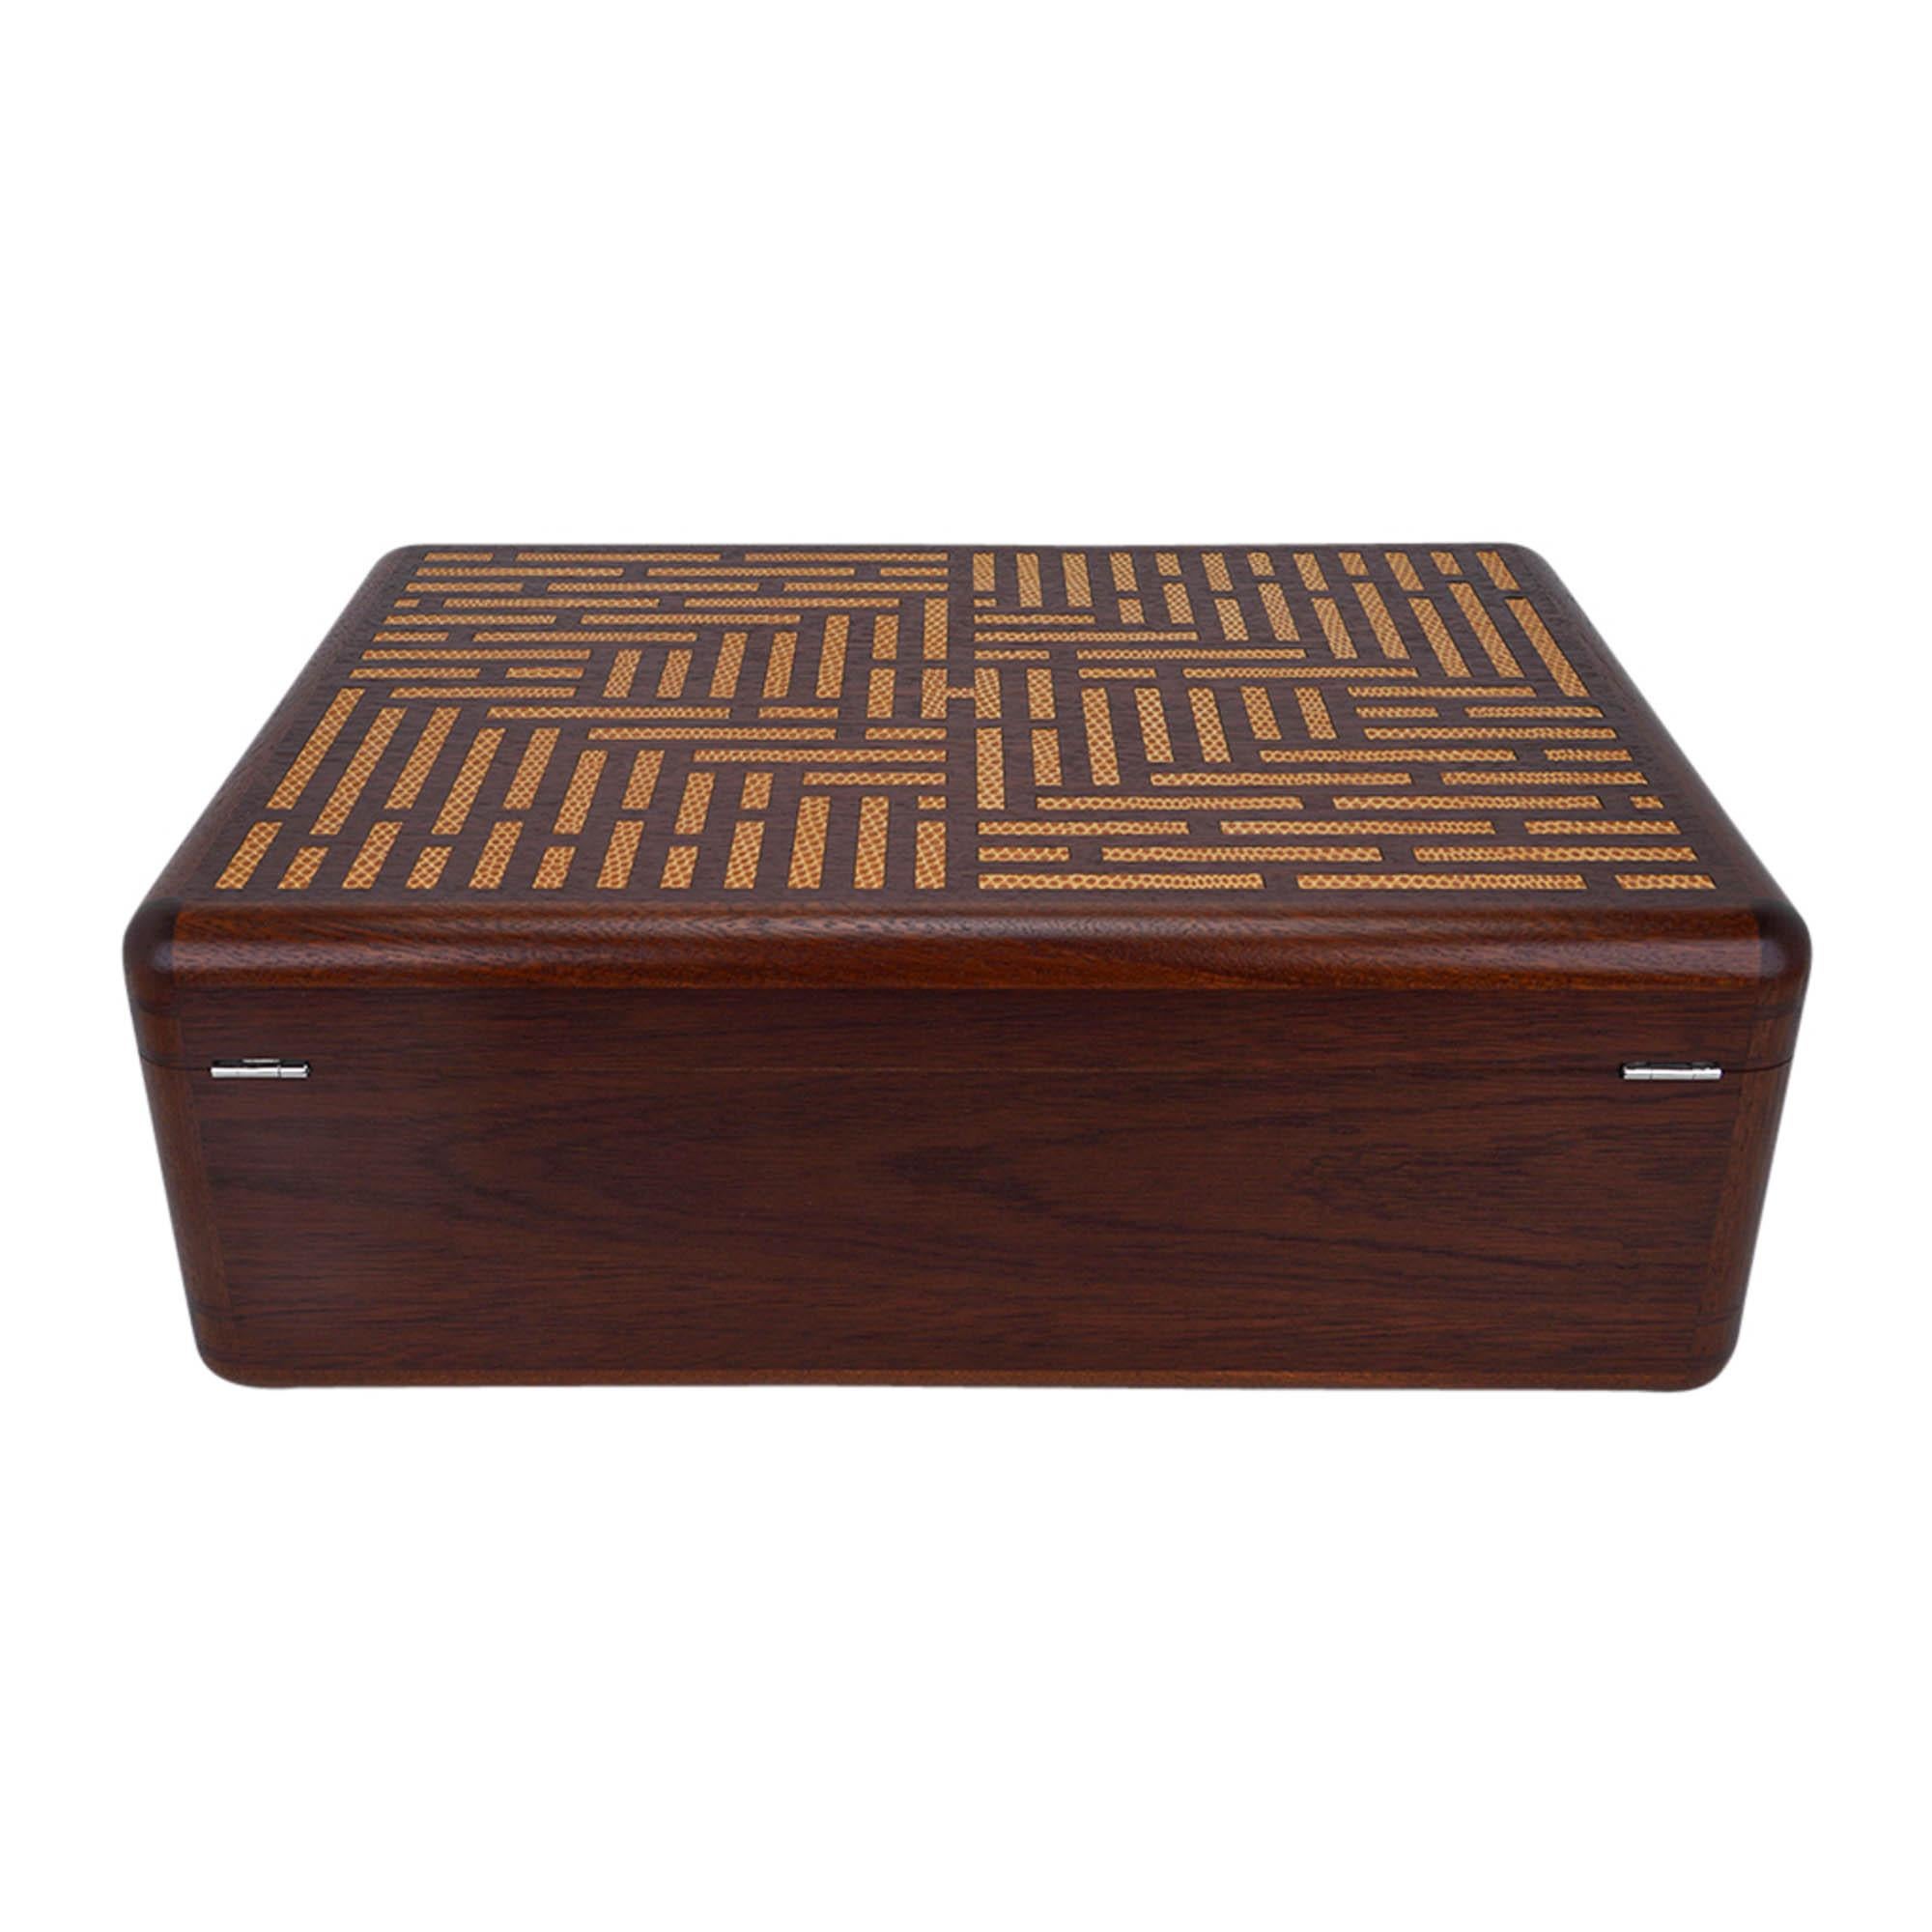 Hermes Coffret a Cigares Humidor Limited Edition Sycamore Wood Sesame Lizard For Sale 14